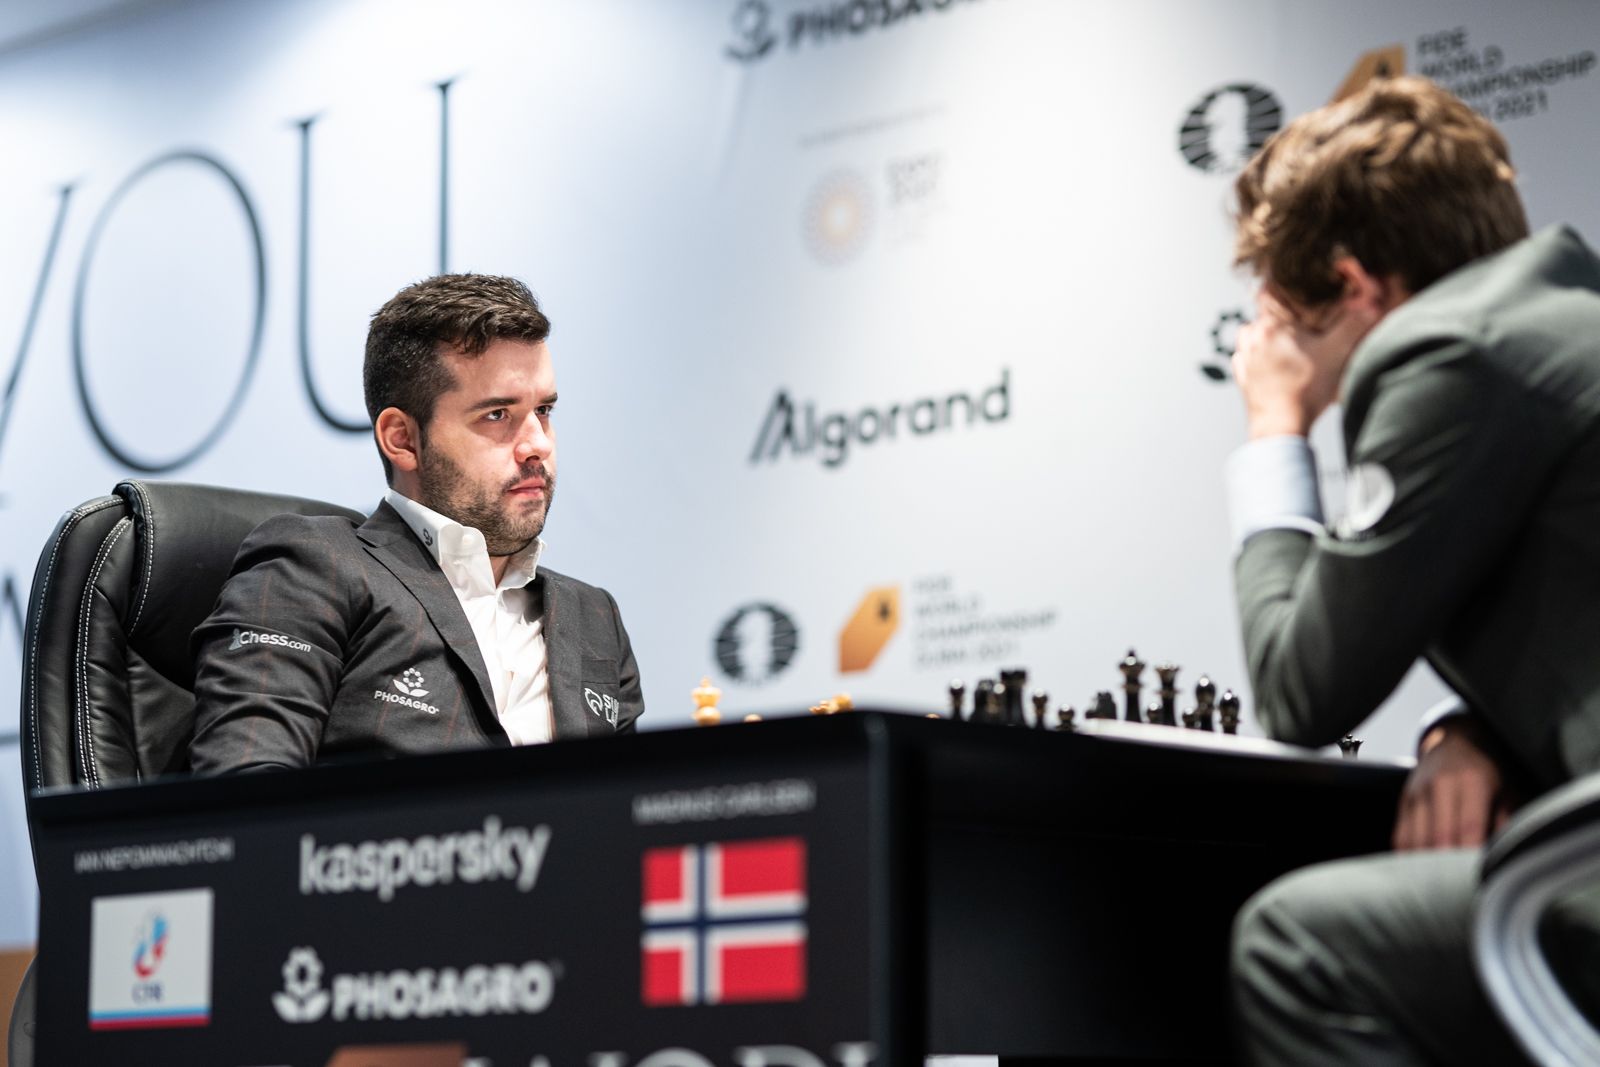 FIDE World Chess Championship Game 3: Magnus Bulletproof With Black - Chess .com